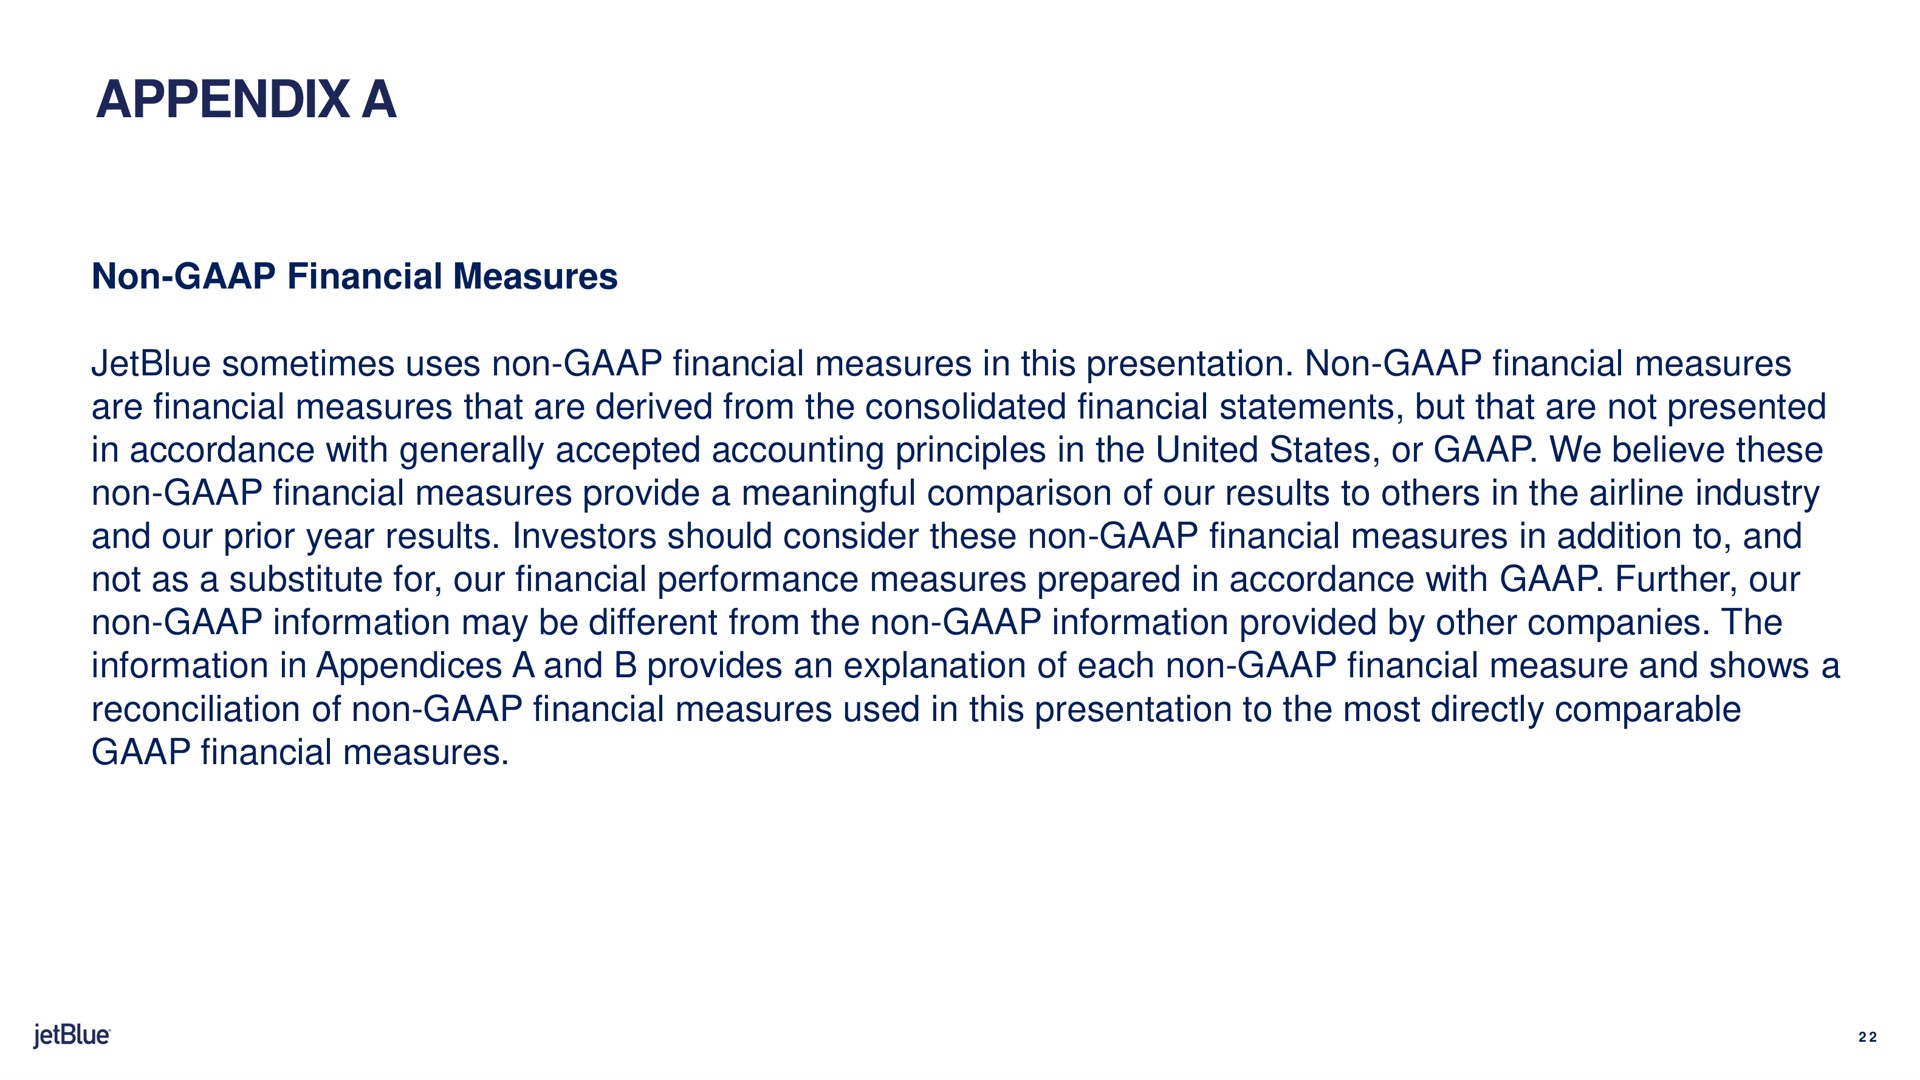 appendix a non financial measures sometimes uses non financial measures in this presentation non financial measures are financial measures that are derived from the consolidated financial statements but that are not presented in accordance with generally accepted accounting principles in the united states or we believe these non financial measures provide a meaningful comparison of our results to in the industry and our prior year results investors should consider these non financial measures in addition to and not as a substitute for our financial performance measures prepared in accordance with further our non information may be different from the non information provided by other companies the information in appendices a and provides an explanation of each non financial measure and shows a reconciliation of non financial measures used in this presentation to the most directly comparable financial measures | jetBlue